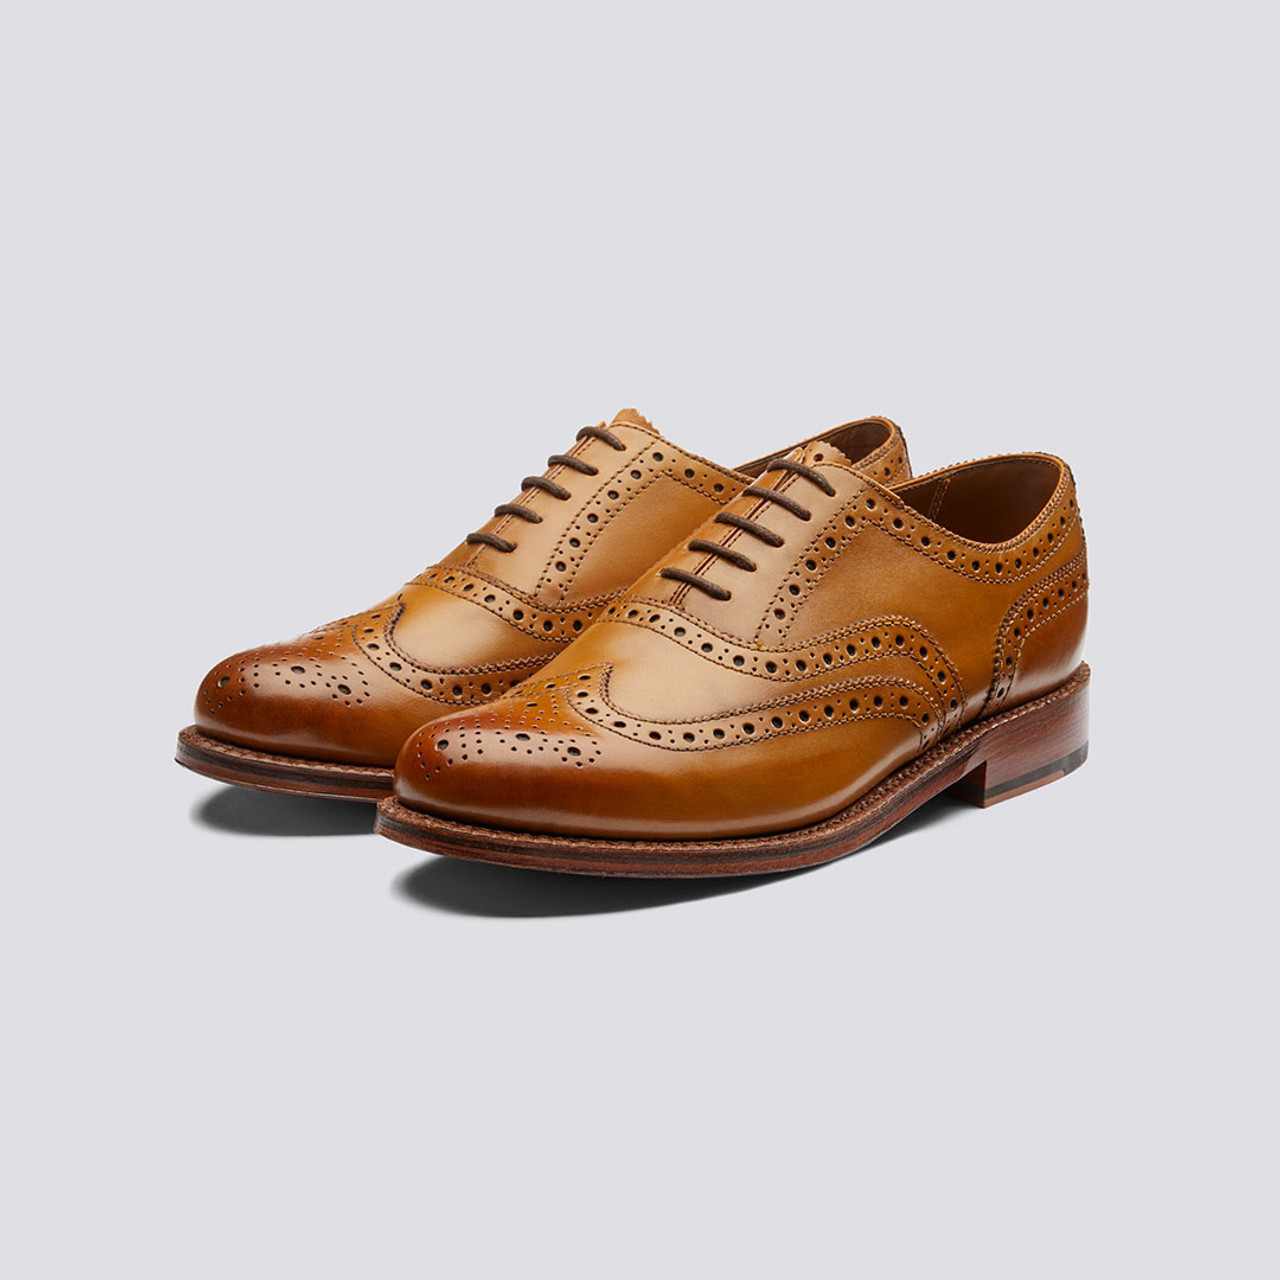 Stanley | Mens Oxford Brogue in Tan Calf Leather with a Leather Sole ...